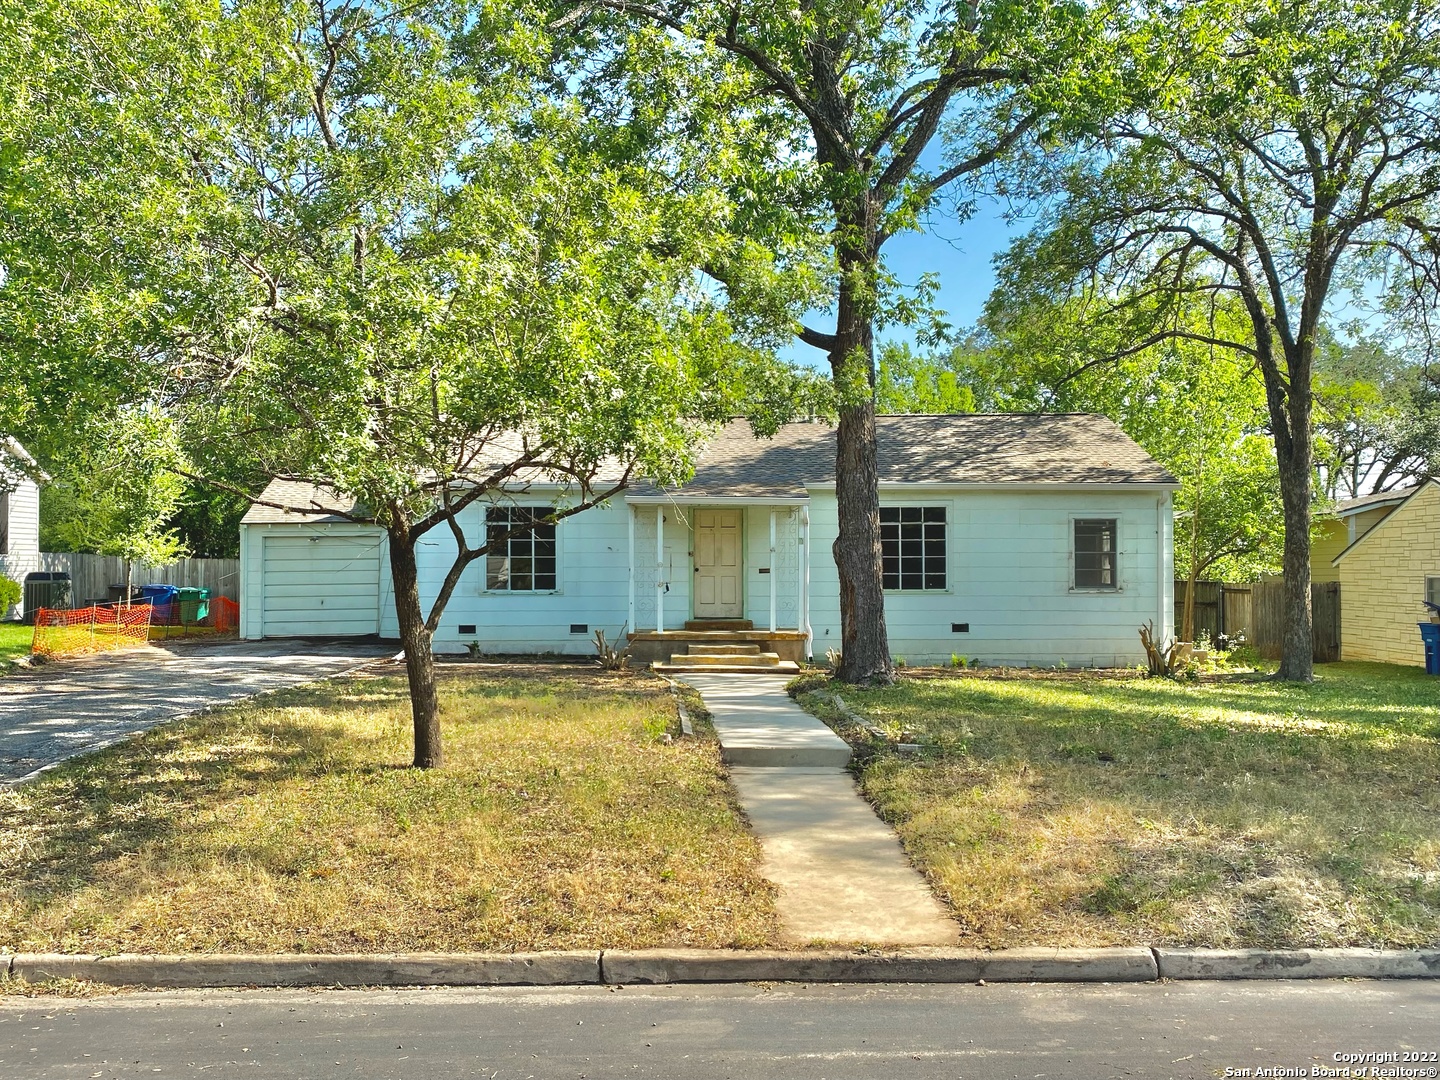 Fantastic investment opportunity in Alamo Heights ISD!  This home would make for a great fix and flip or rental property. It features a newer roof, HVAC system, and concrete piers.  Nestled on a quarter-acre lot in highly sought after Terrell Heights. Homes in AHISD at this price point are few and far between, come check it out! Sold as-is.